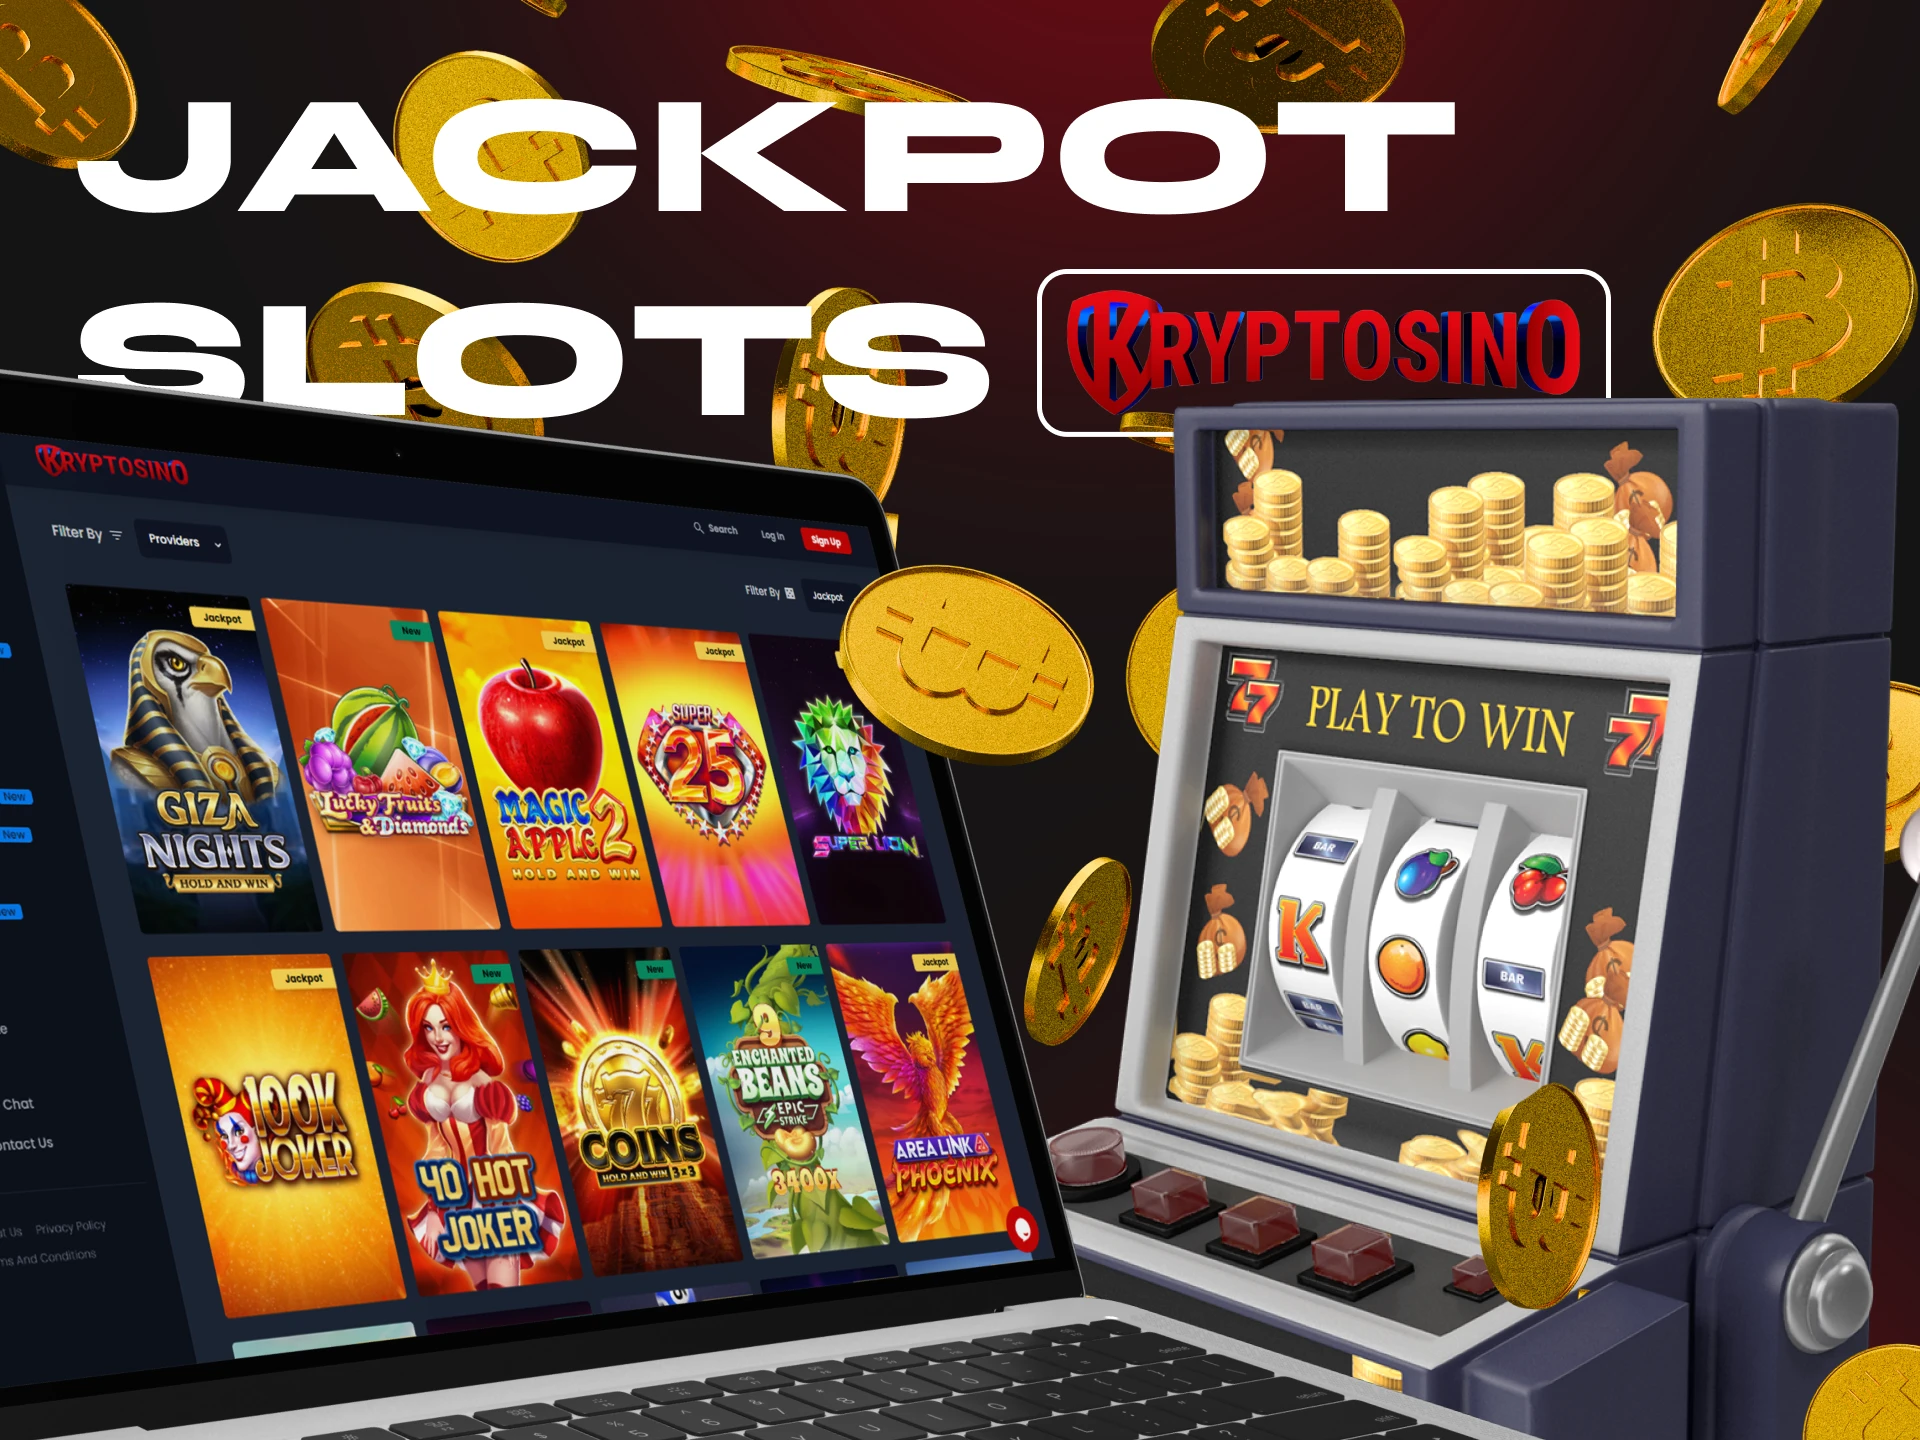 If you're a thrill-seeker, try the jackpot slots games at Kryptosino Casino.